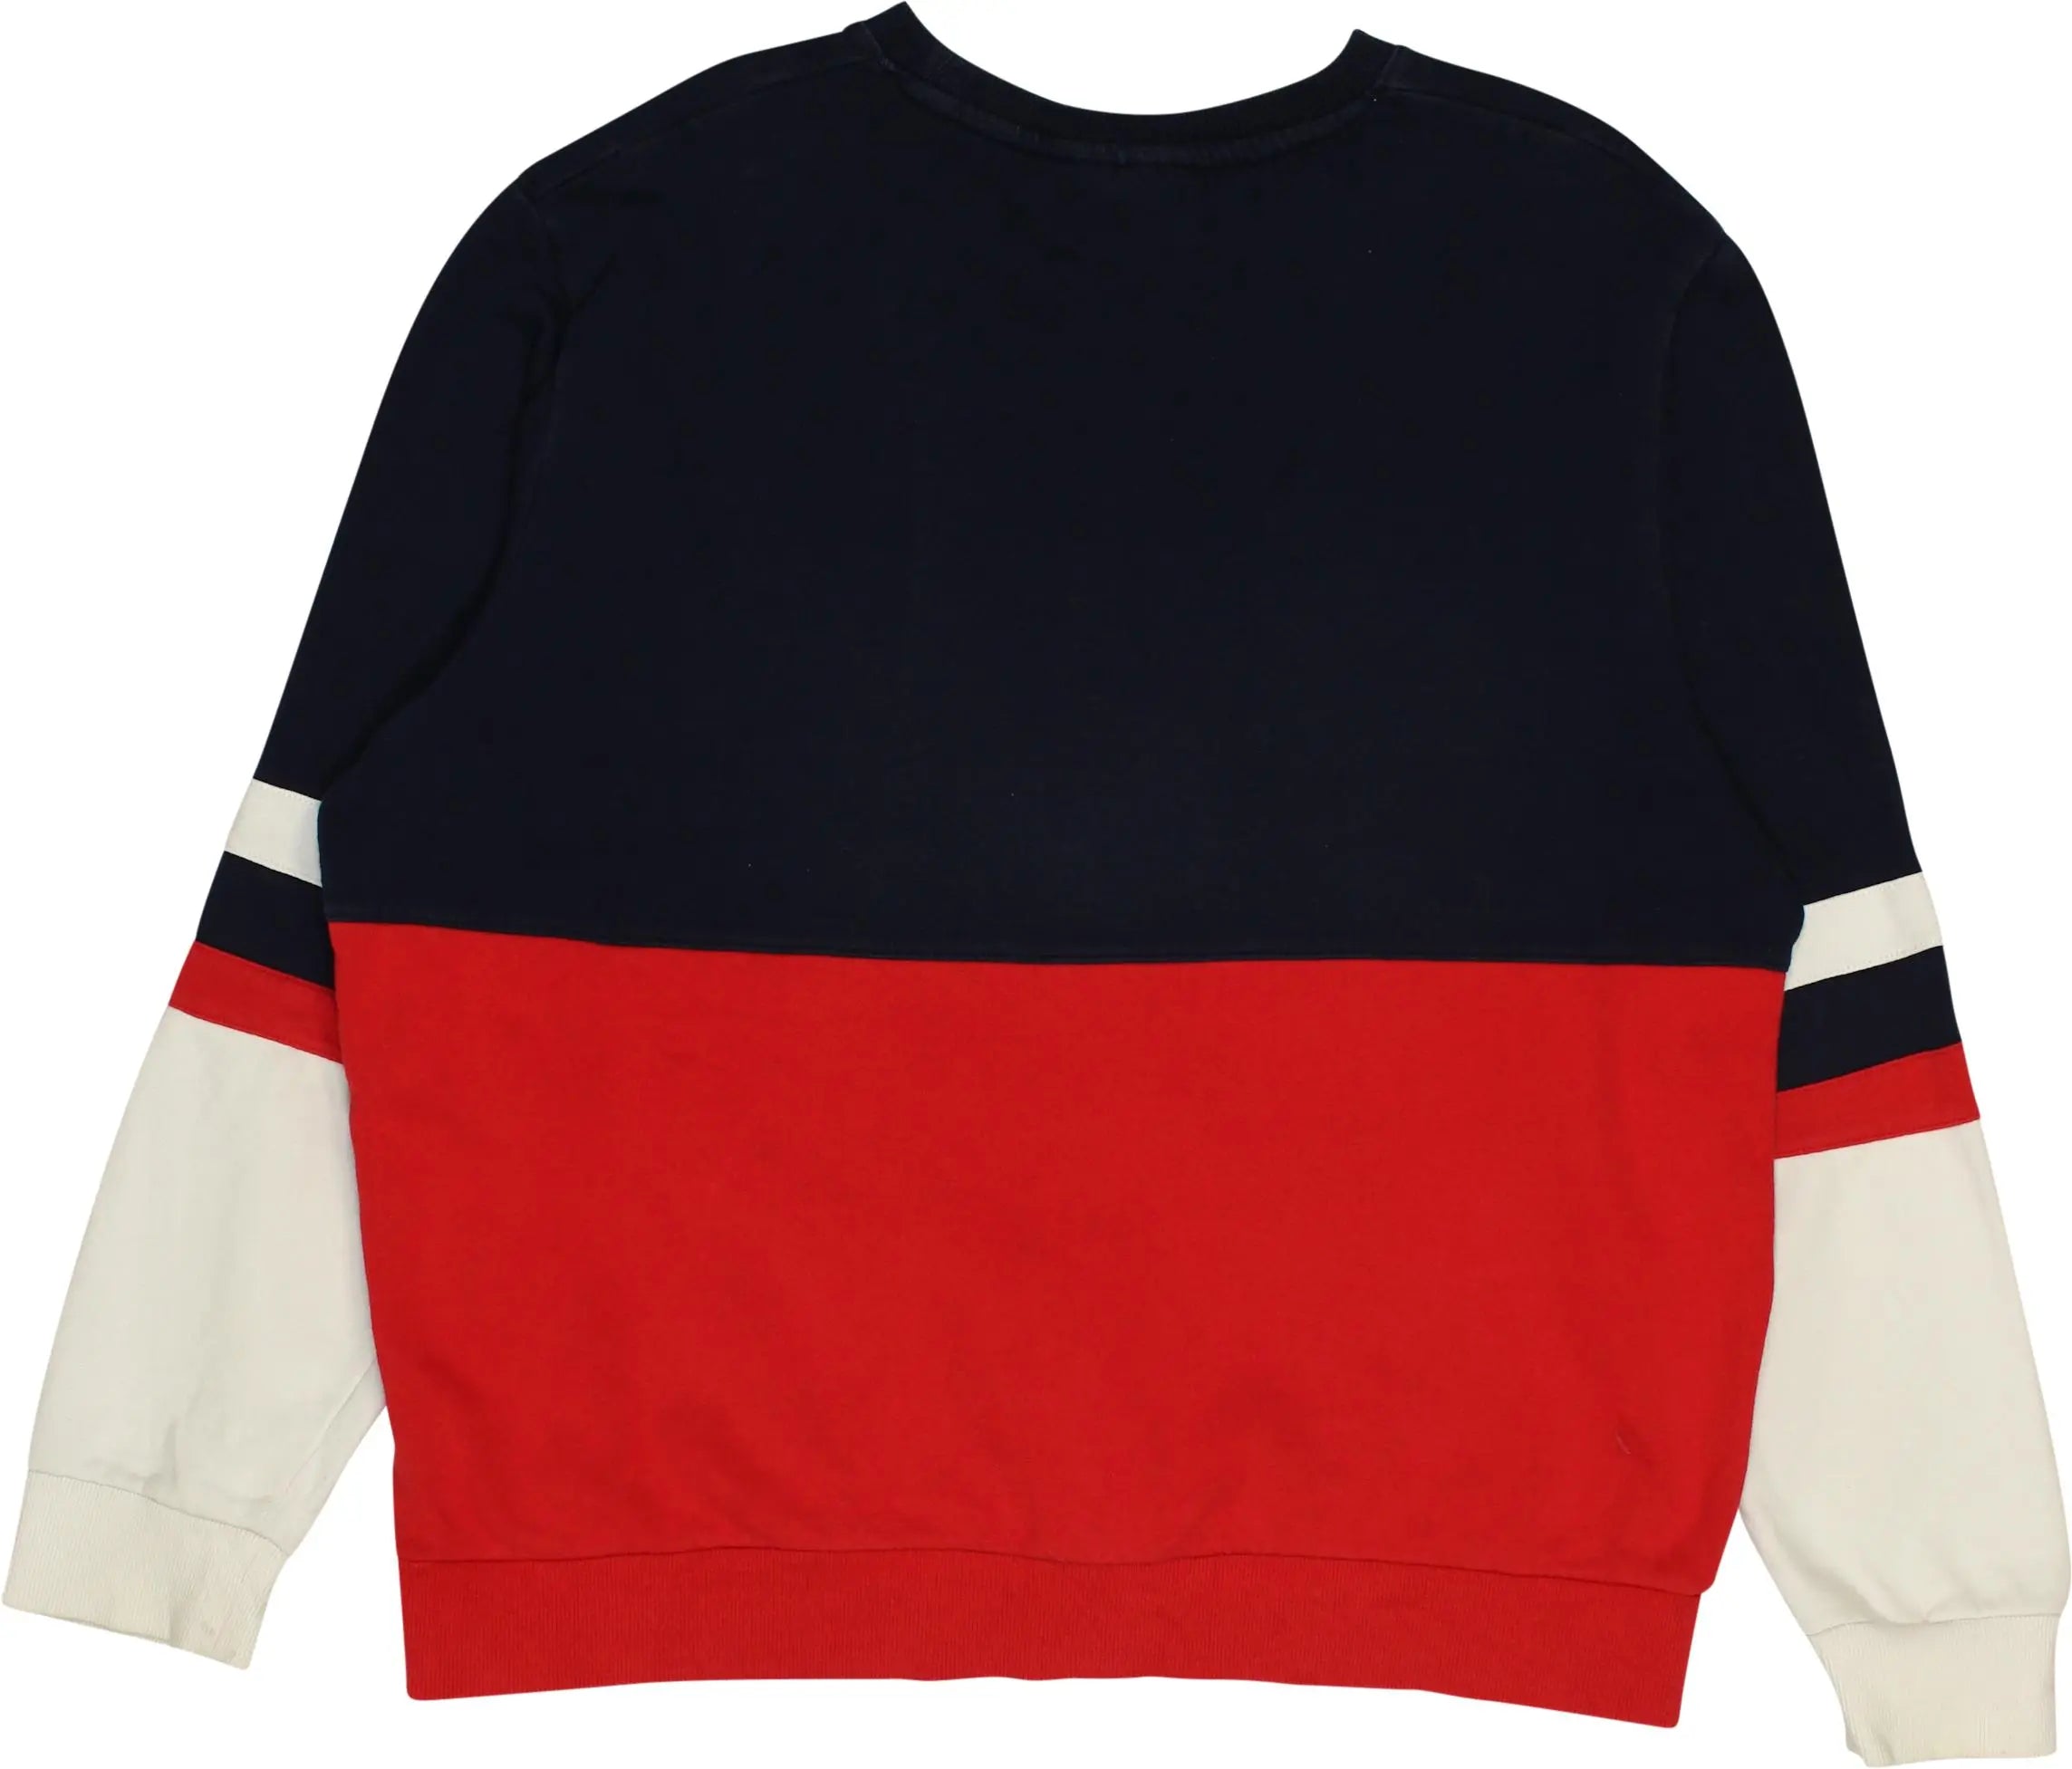 Fila - Sweater- ThriftTale.com - Vintage and second handclothing